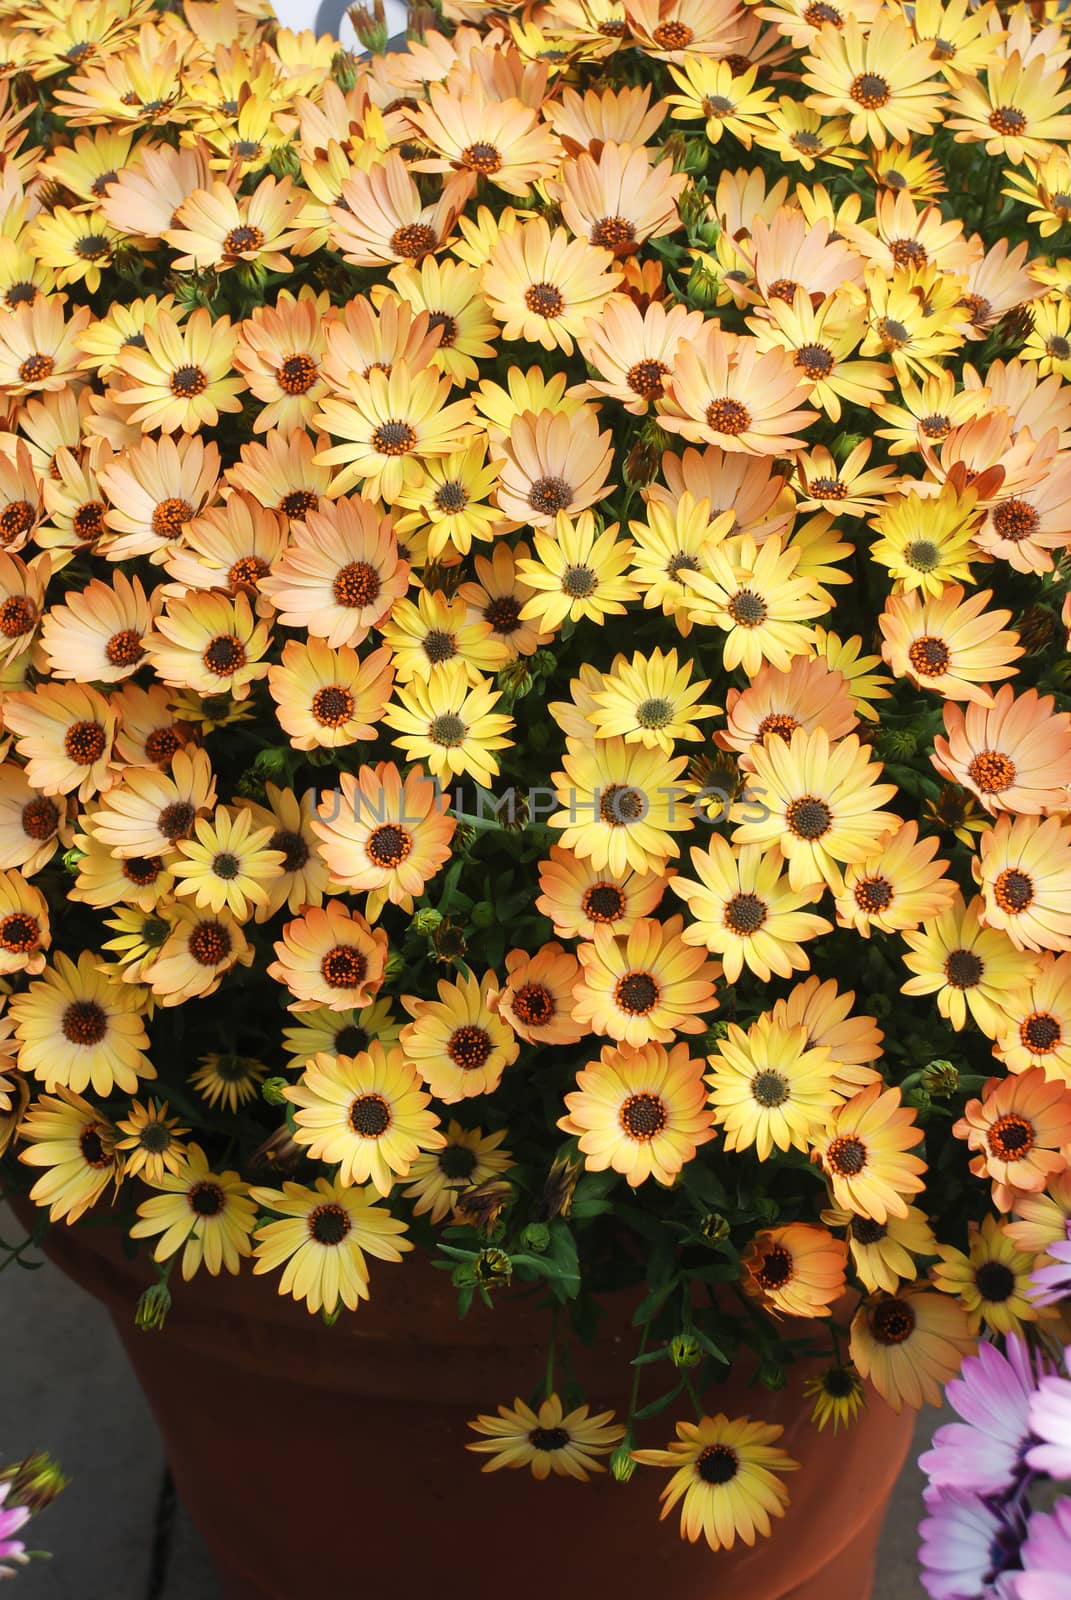 Orange osteospermum or dimorphotheca flowers in the flowerbed by yuiyuize